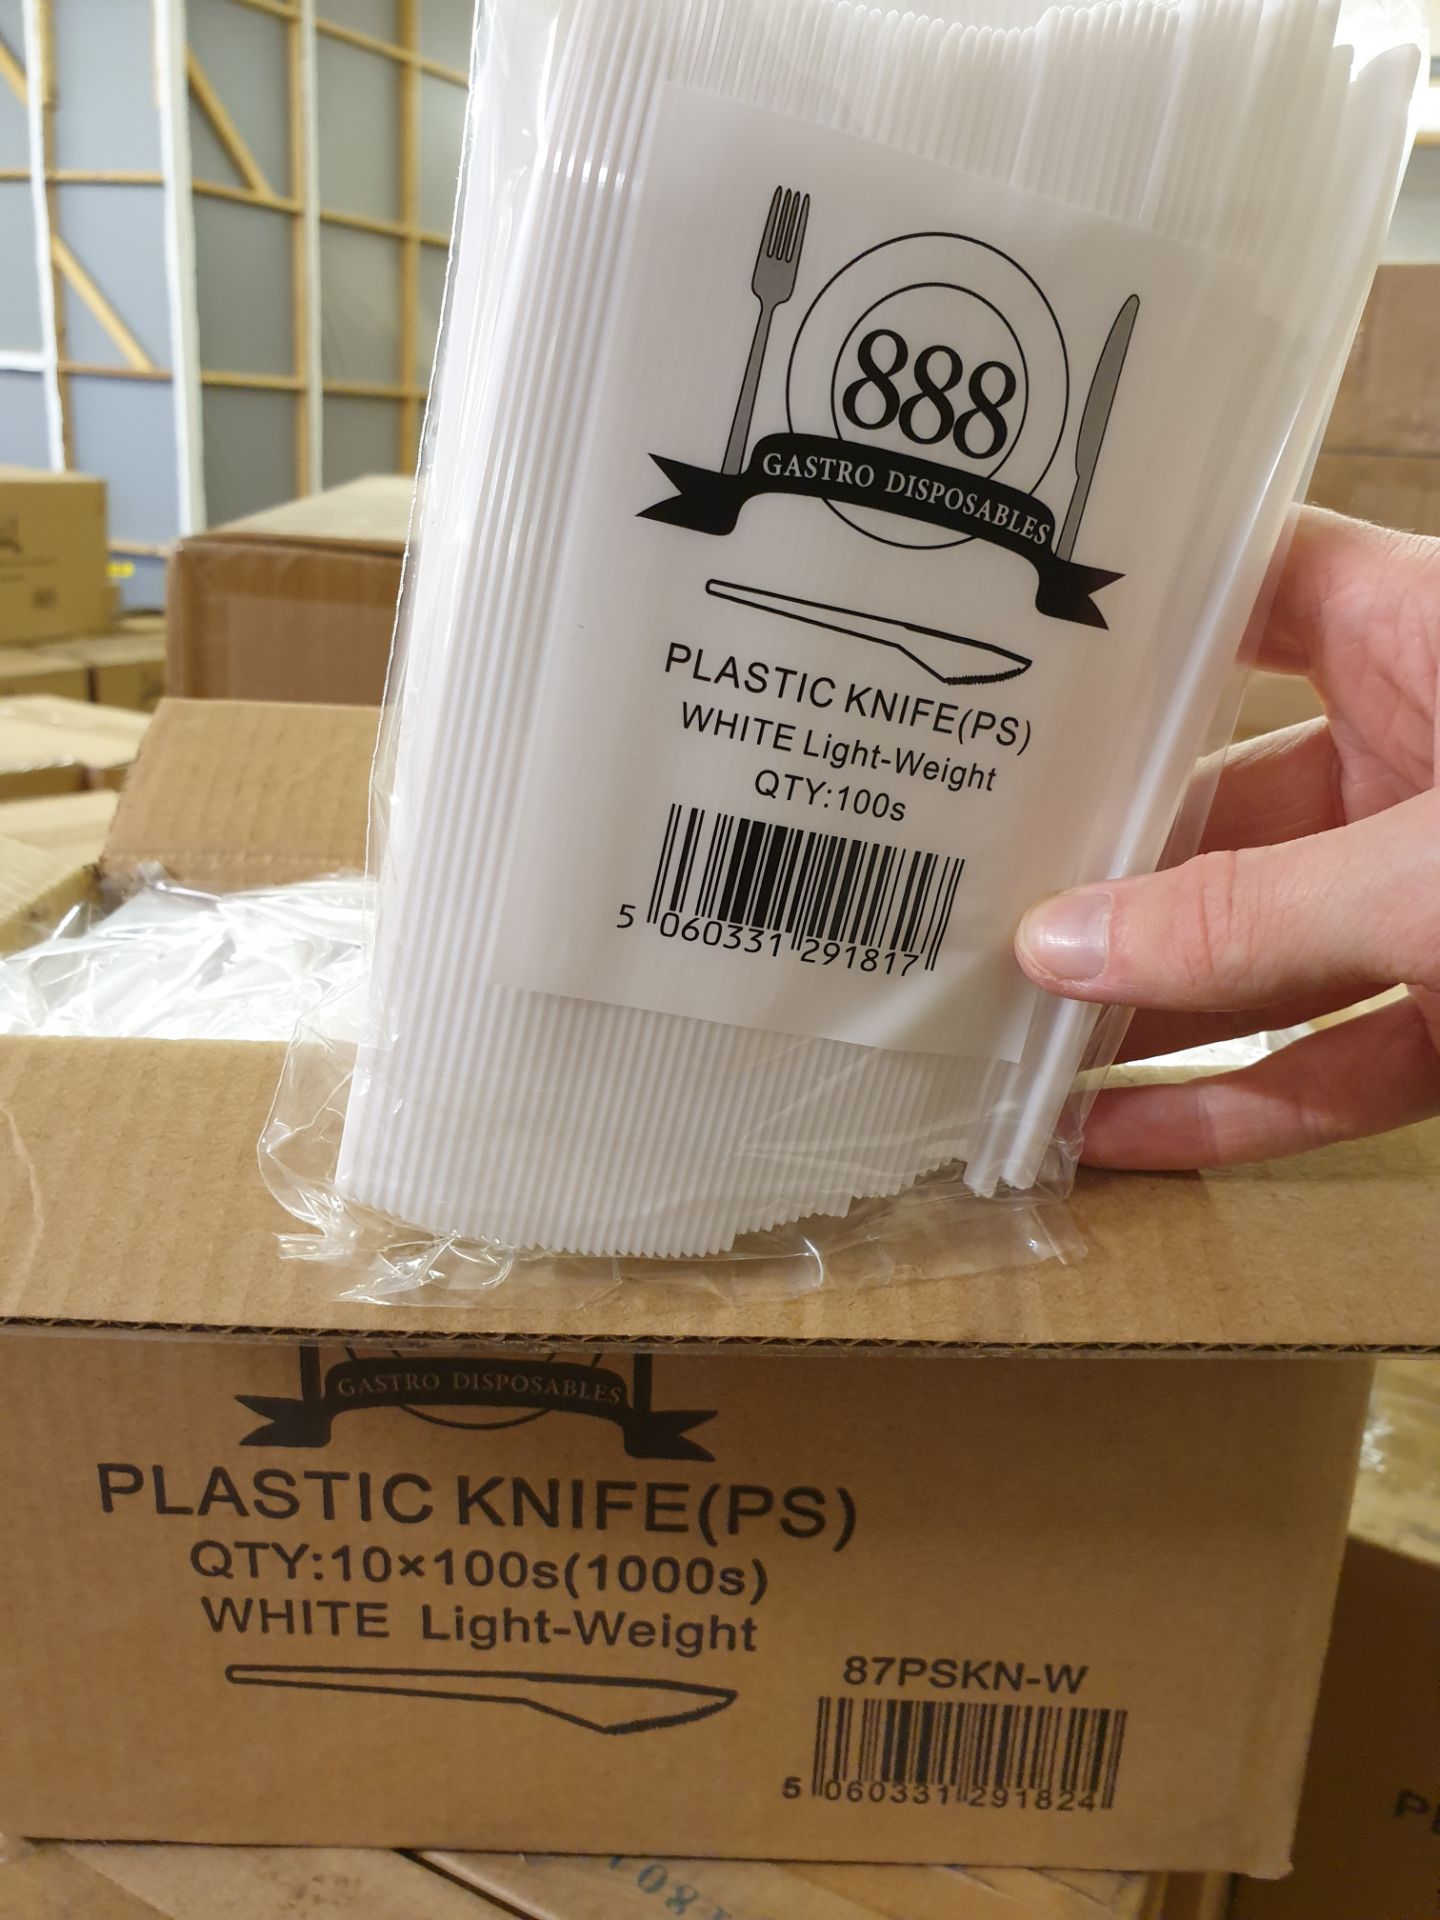 2 x Boxes of 1000 White Plastic Knives by 888 Gastro Disposables | DSP4